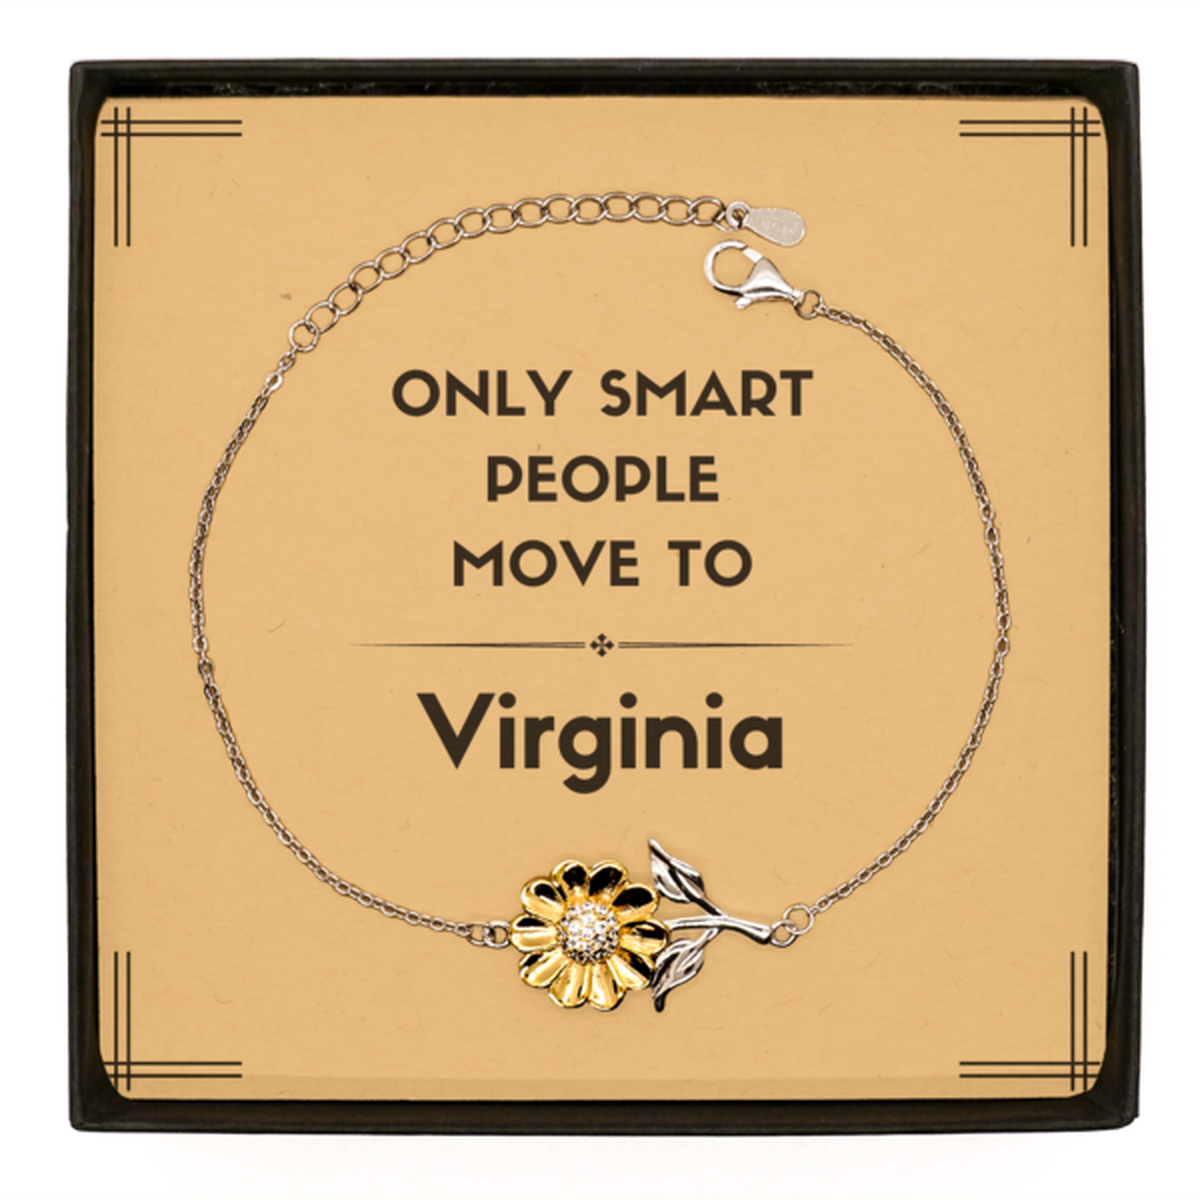 Only smart people move to Virginia Sunflower Bracelet, Message Card Gifts For Virginia, Move to Virginia Gifts for Friends Coworker Funny Saying Quote